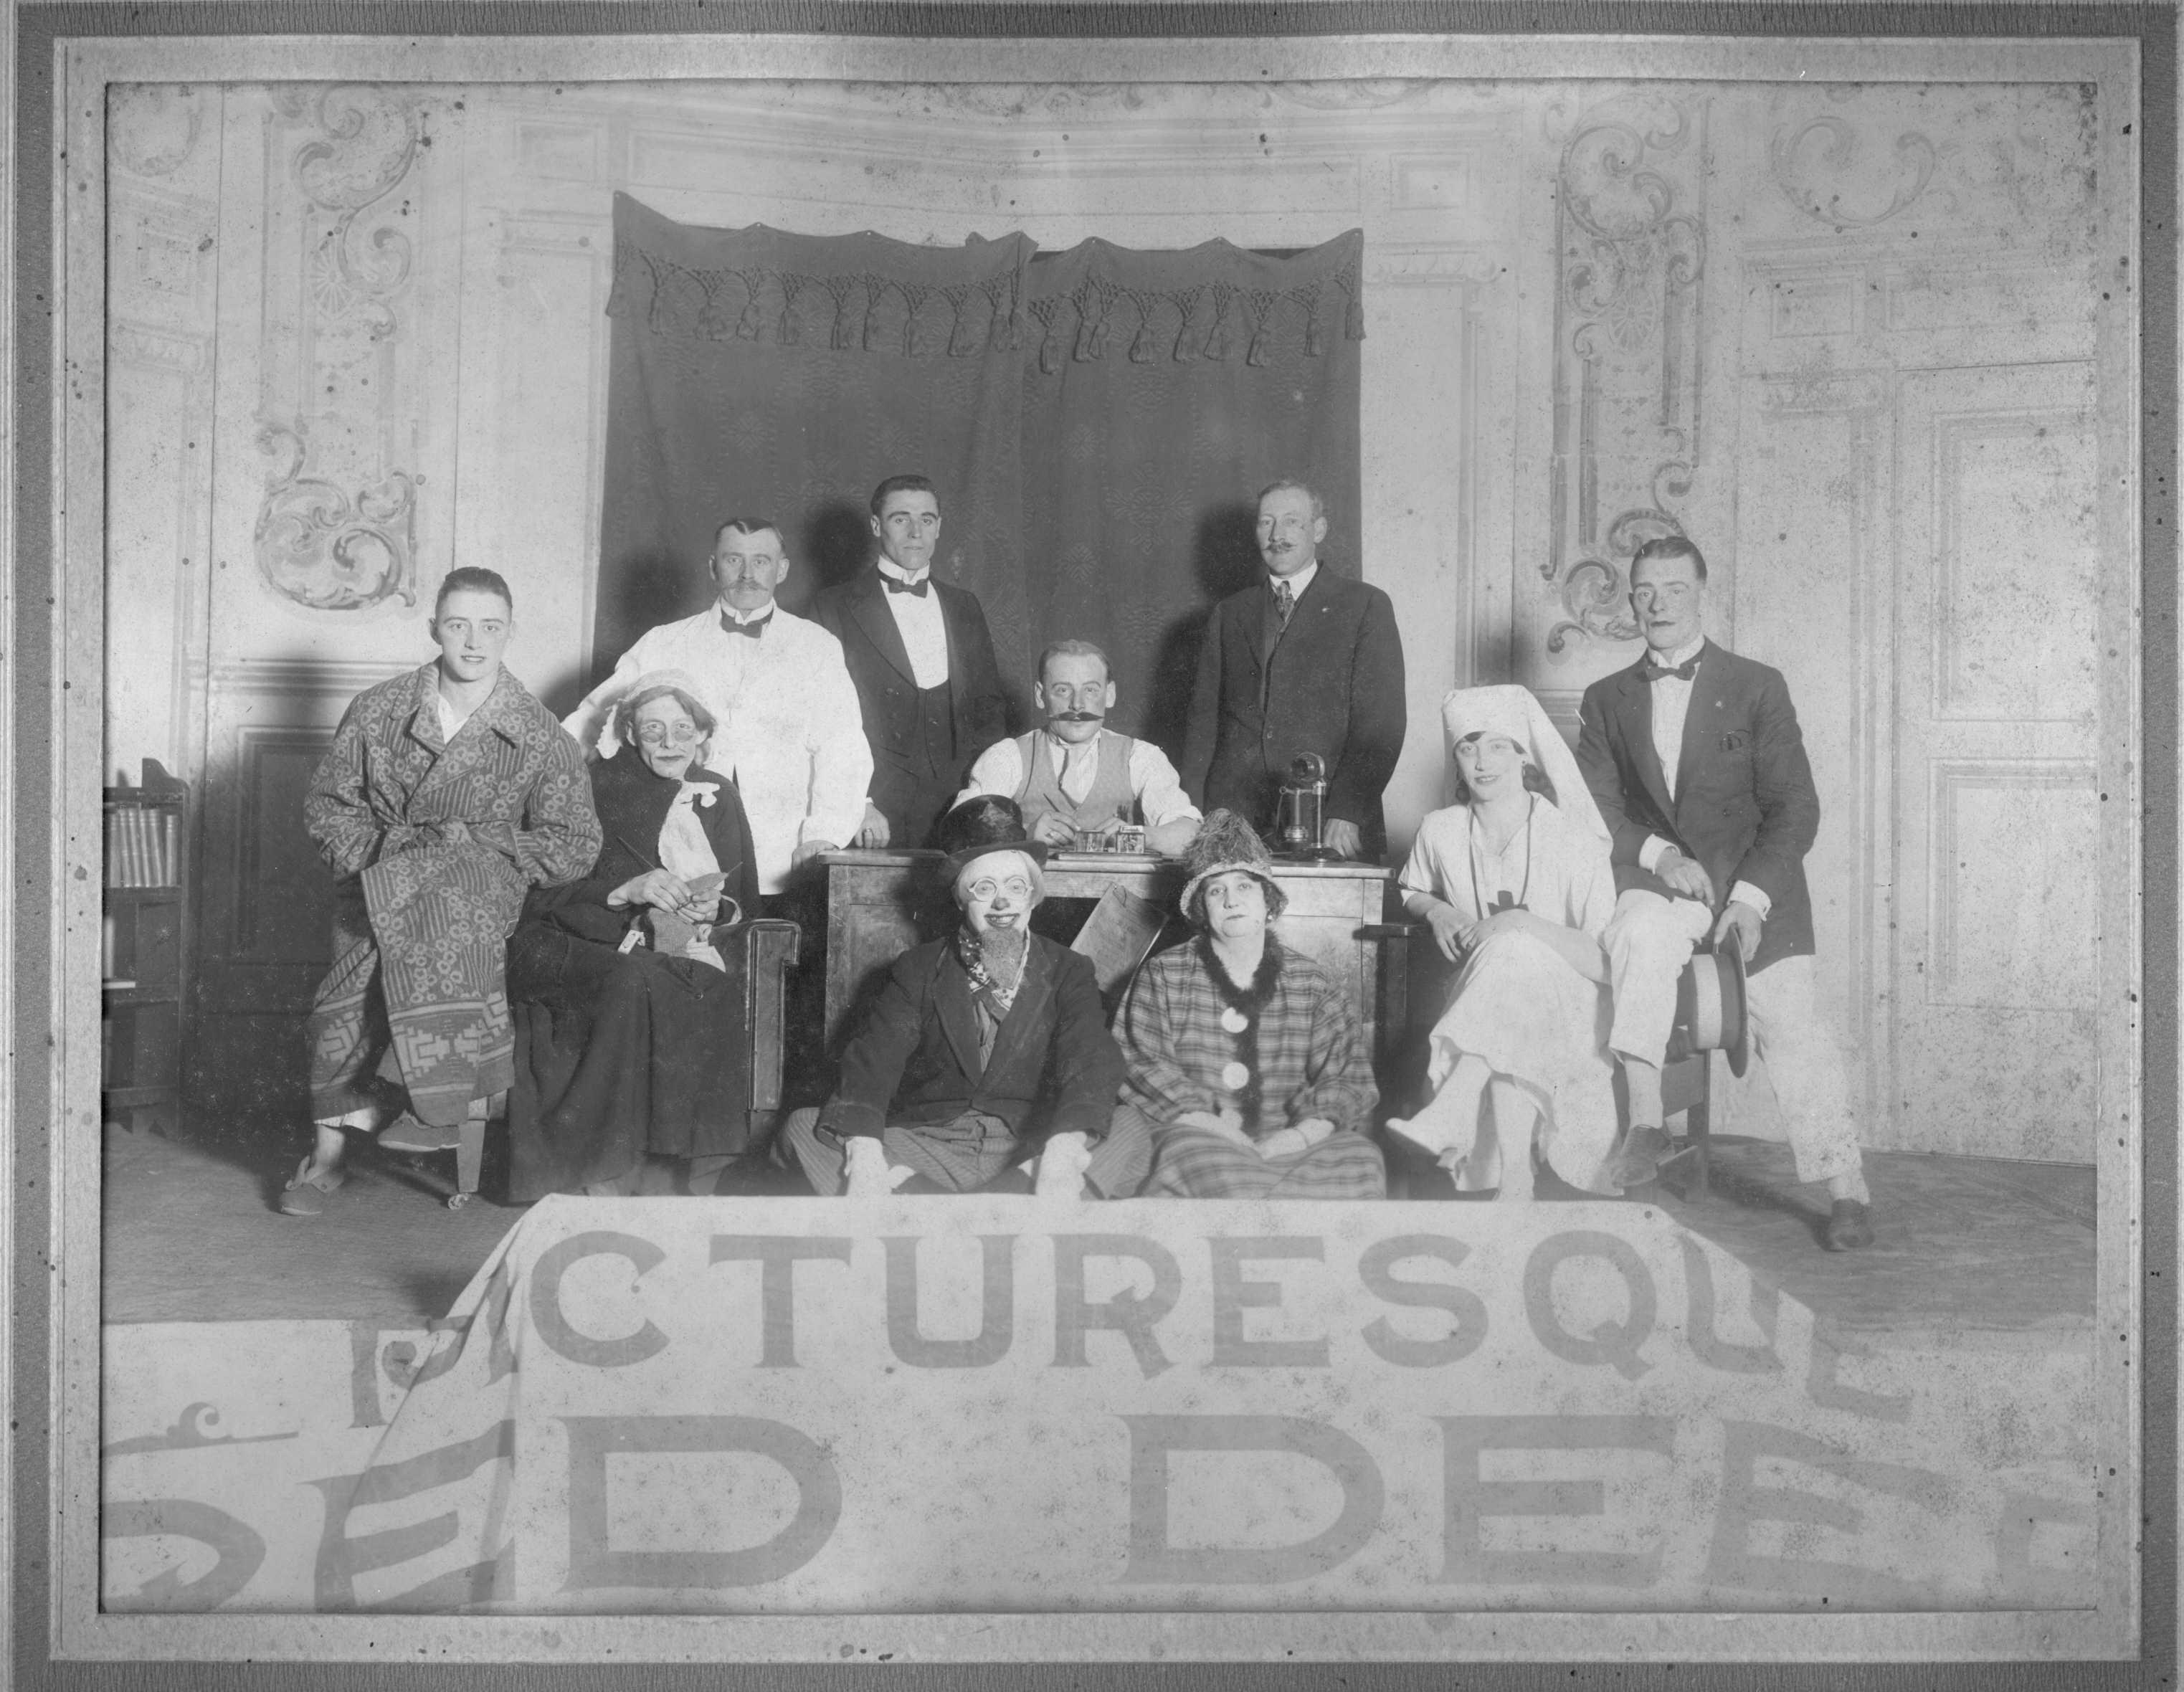 EARLY PERFORMERS- Cast of Picturesque Red Deer at the Rex (Lyric) Theatre on Ross St. c. 1920.